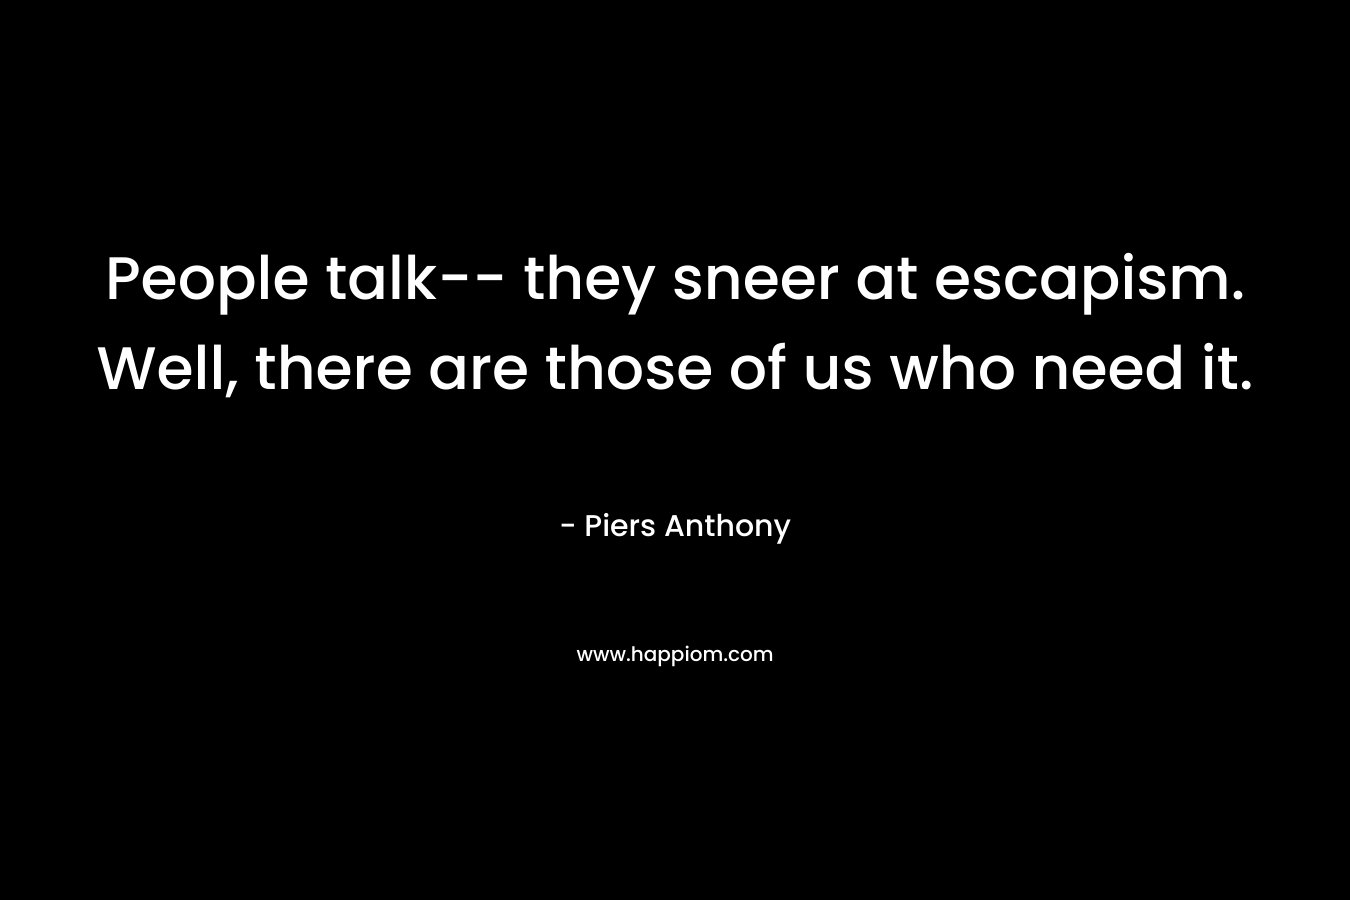 People talk– they sneer at escapism. Well, there are those of us who need it. – Piers Anthony